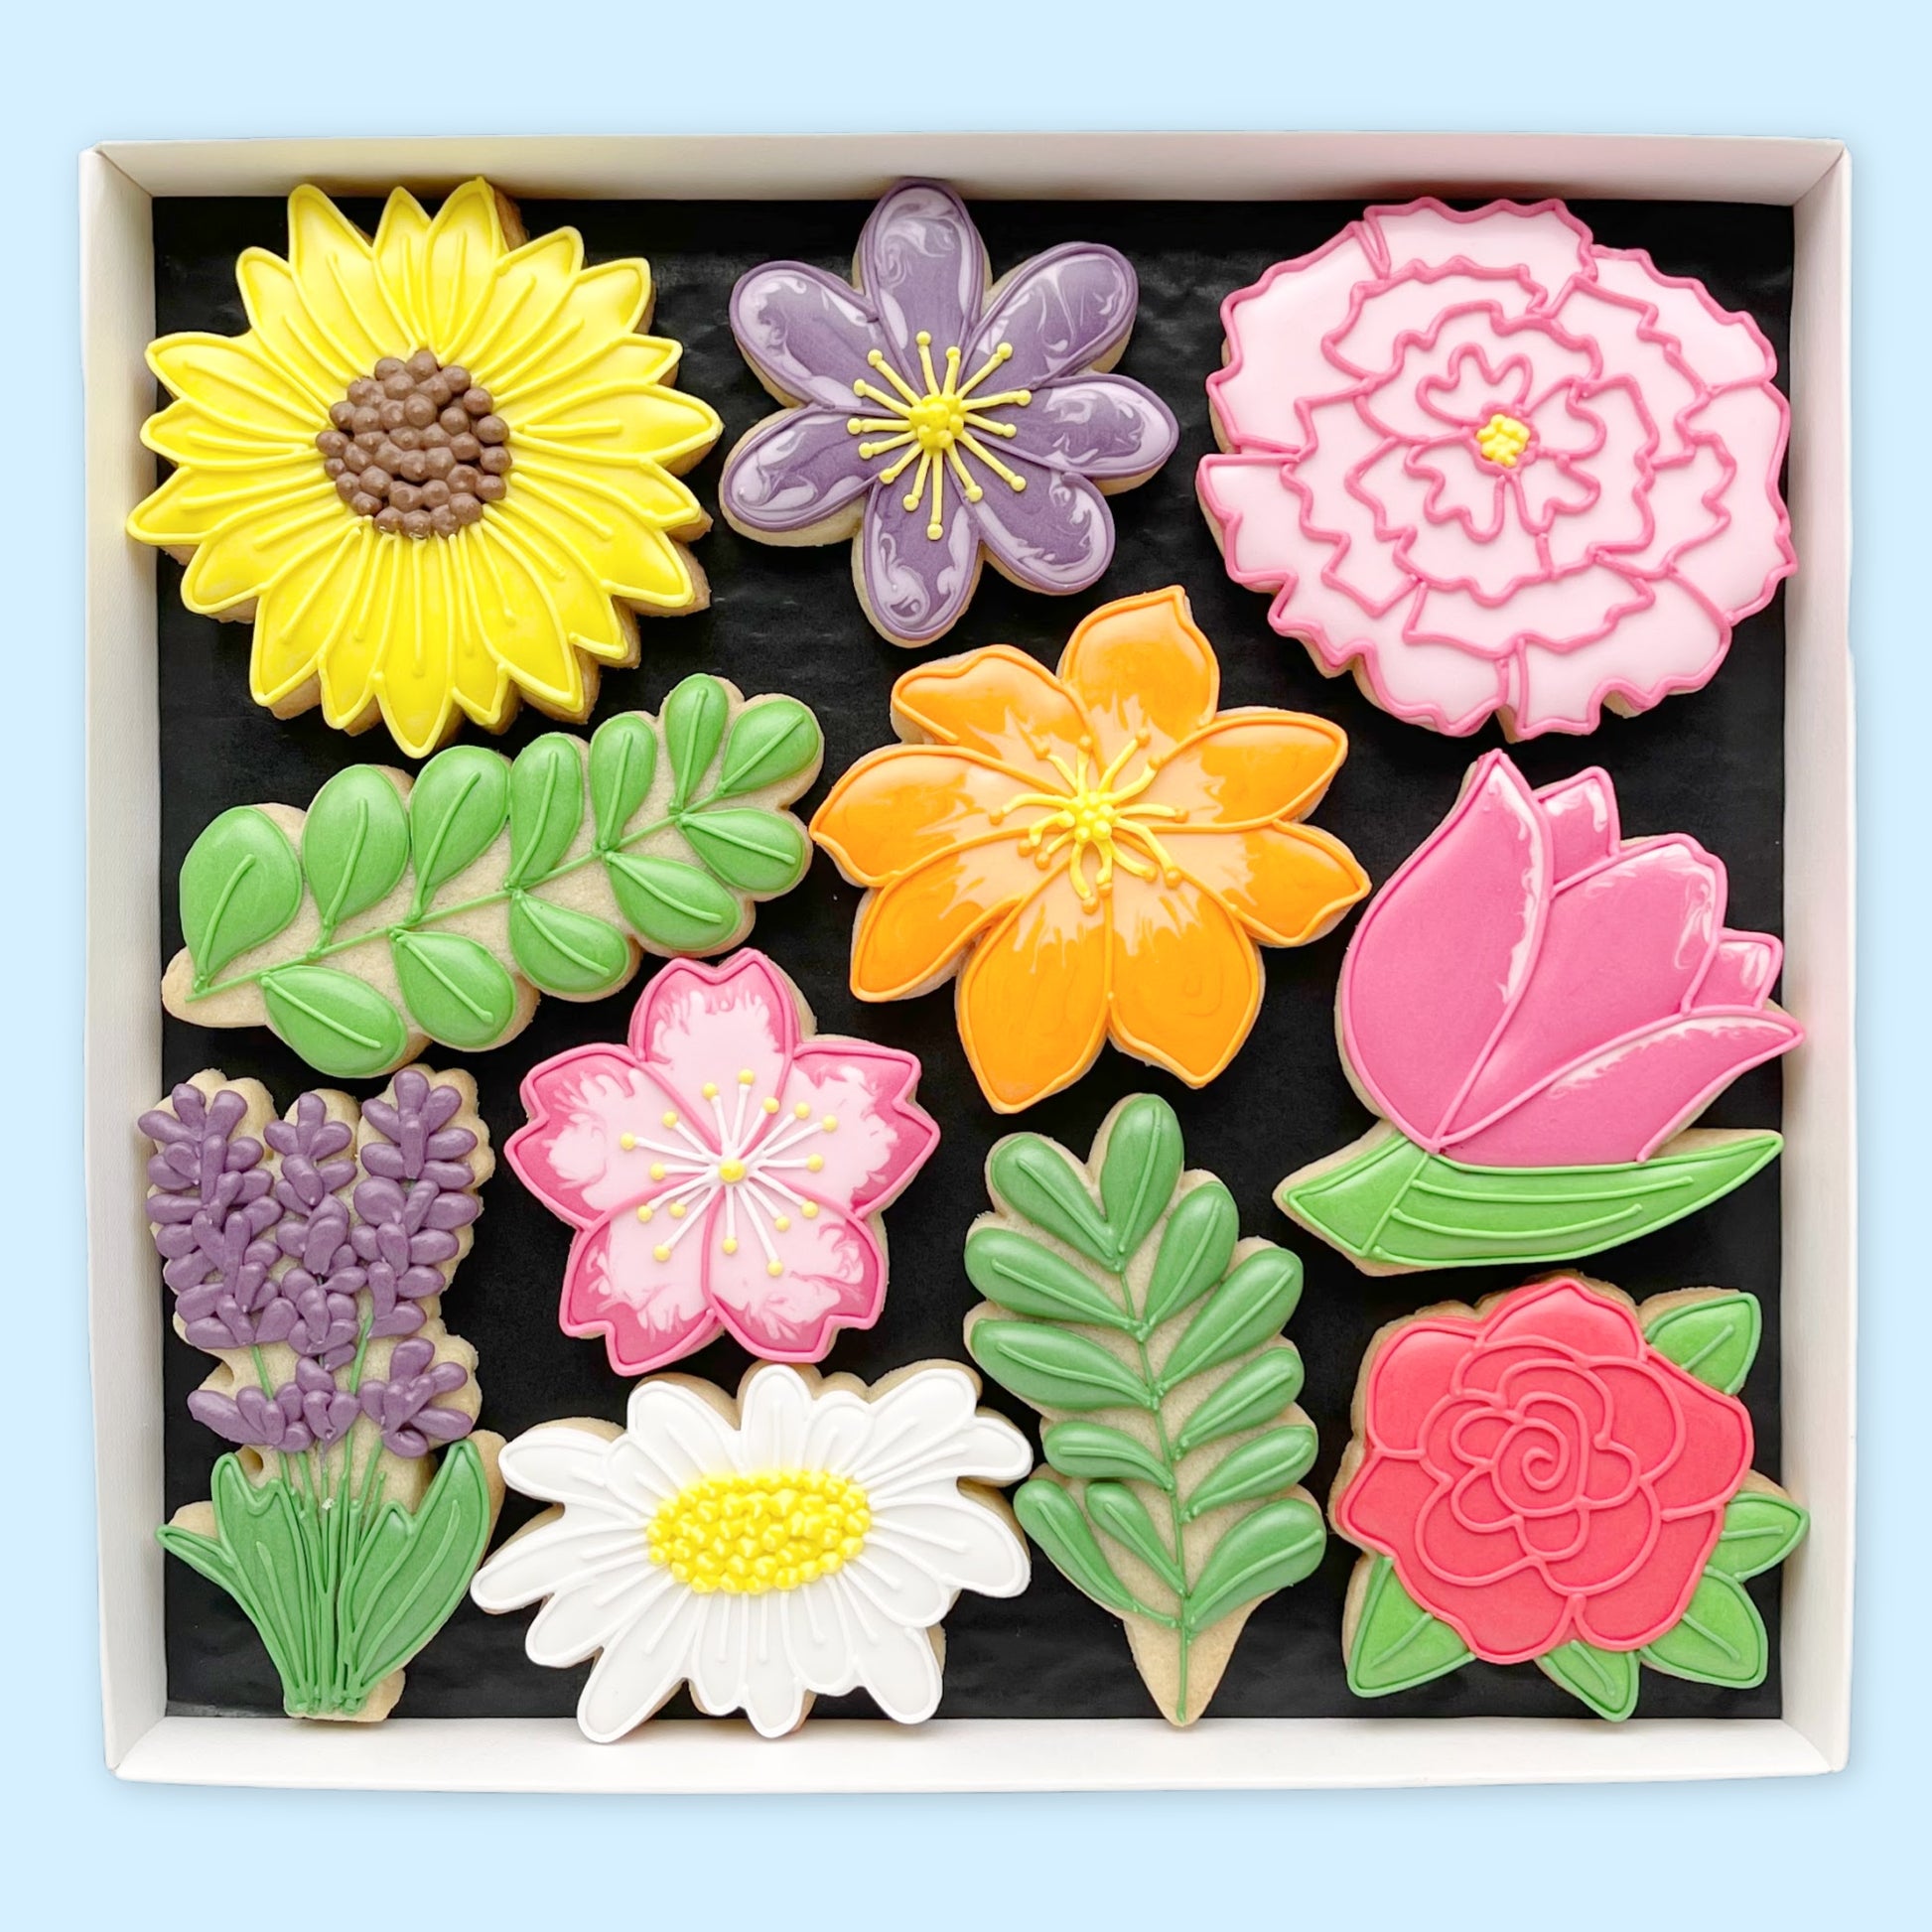 colourful hand iced flower biscuits by Katie's biscuit shop in an open white gift box 